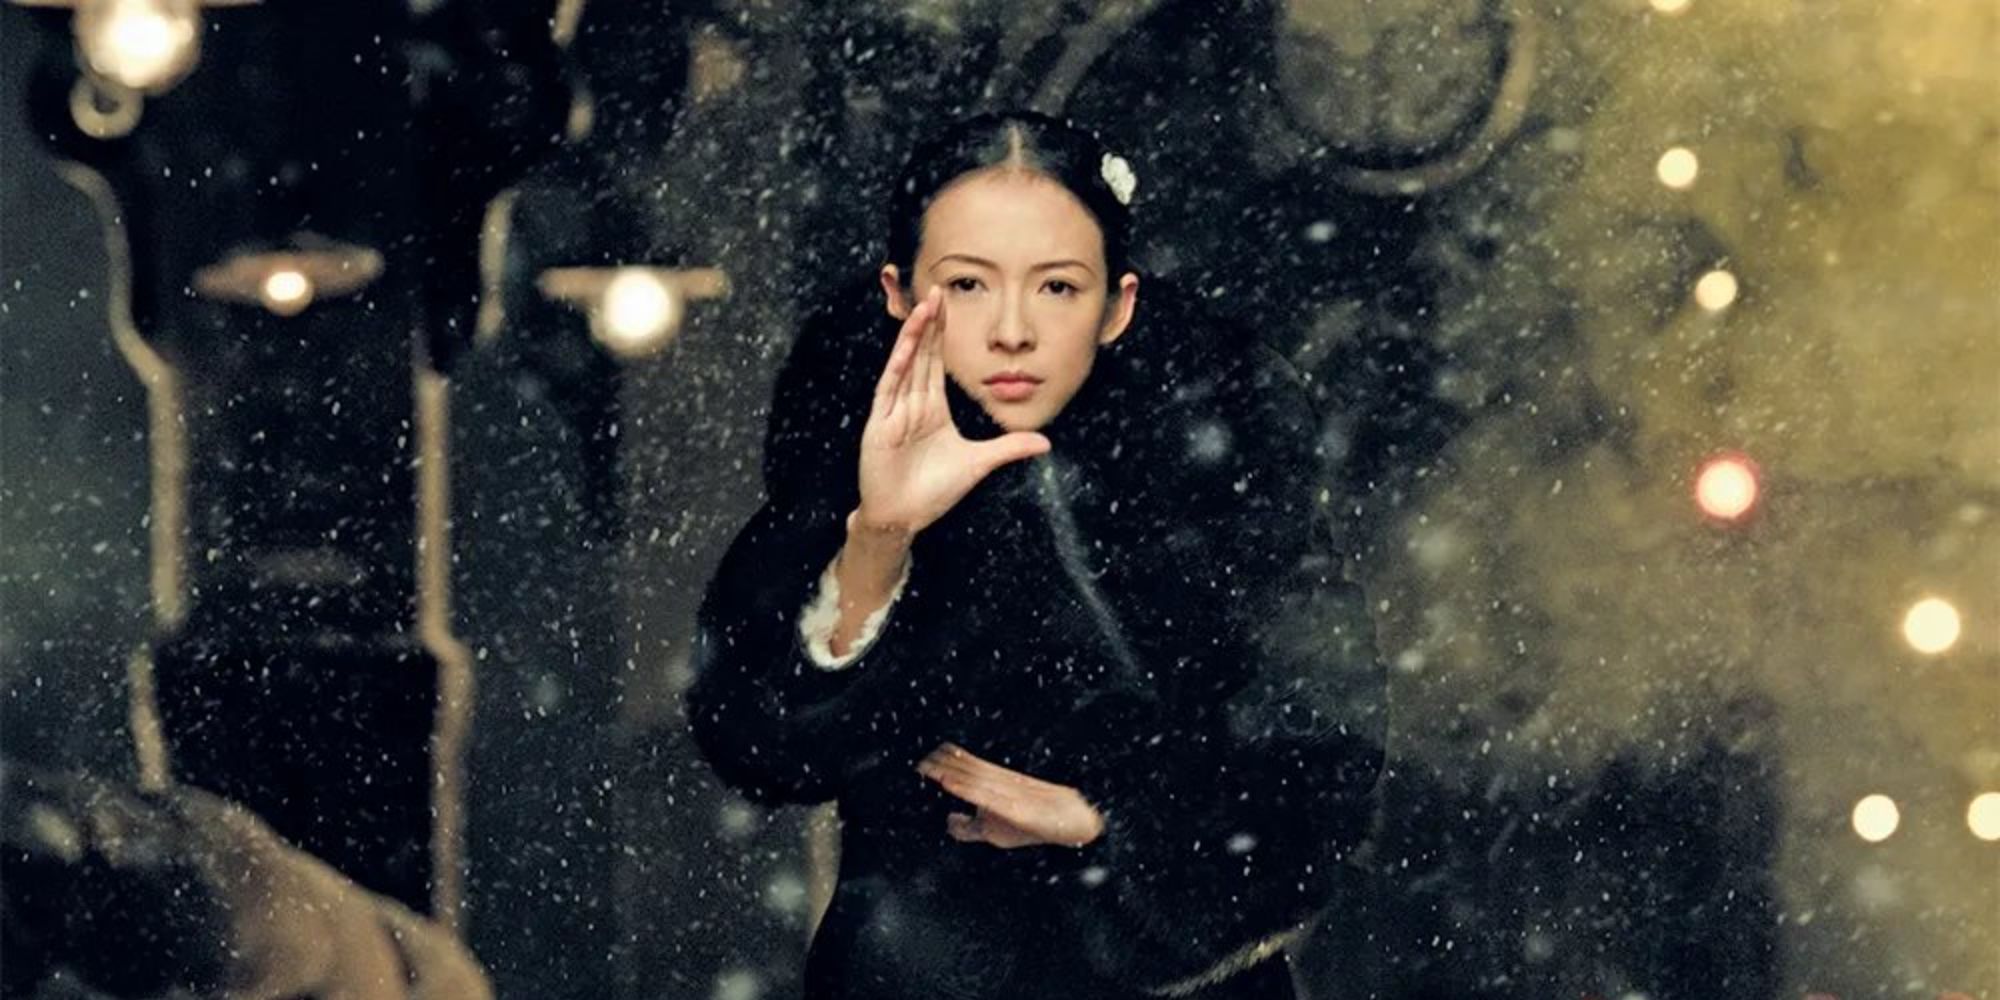 Ziyi Zhang as Gong Er, standing with her hands raised in front of her in The Grandmaster